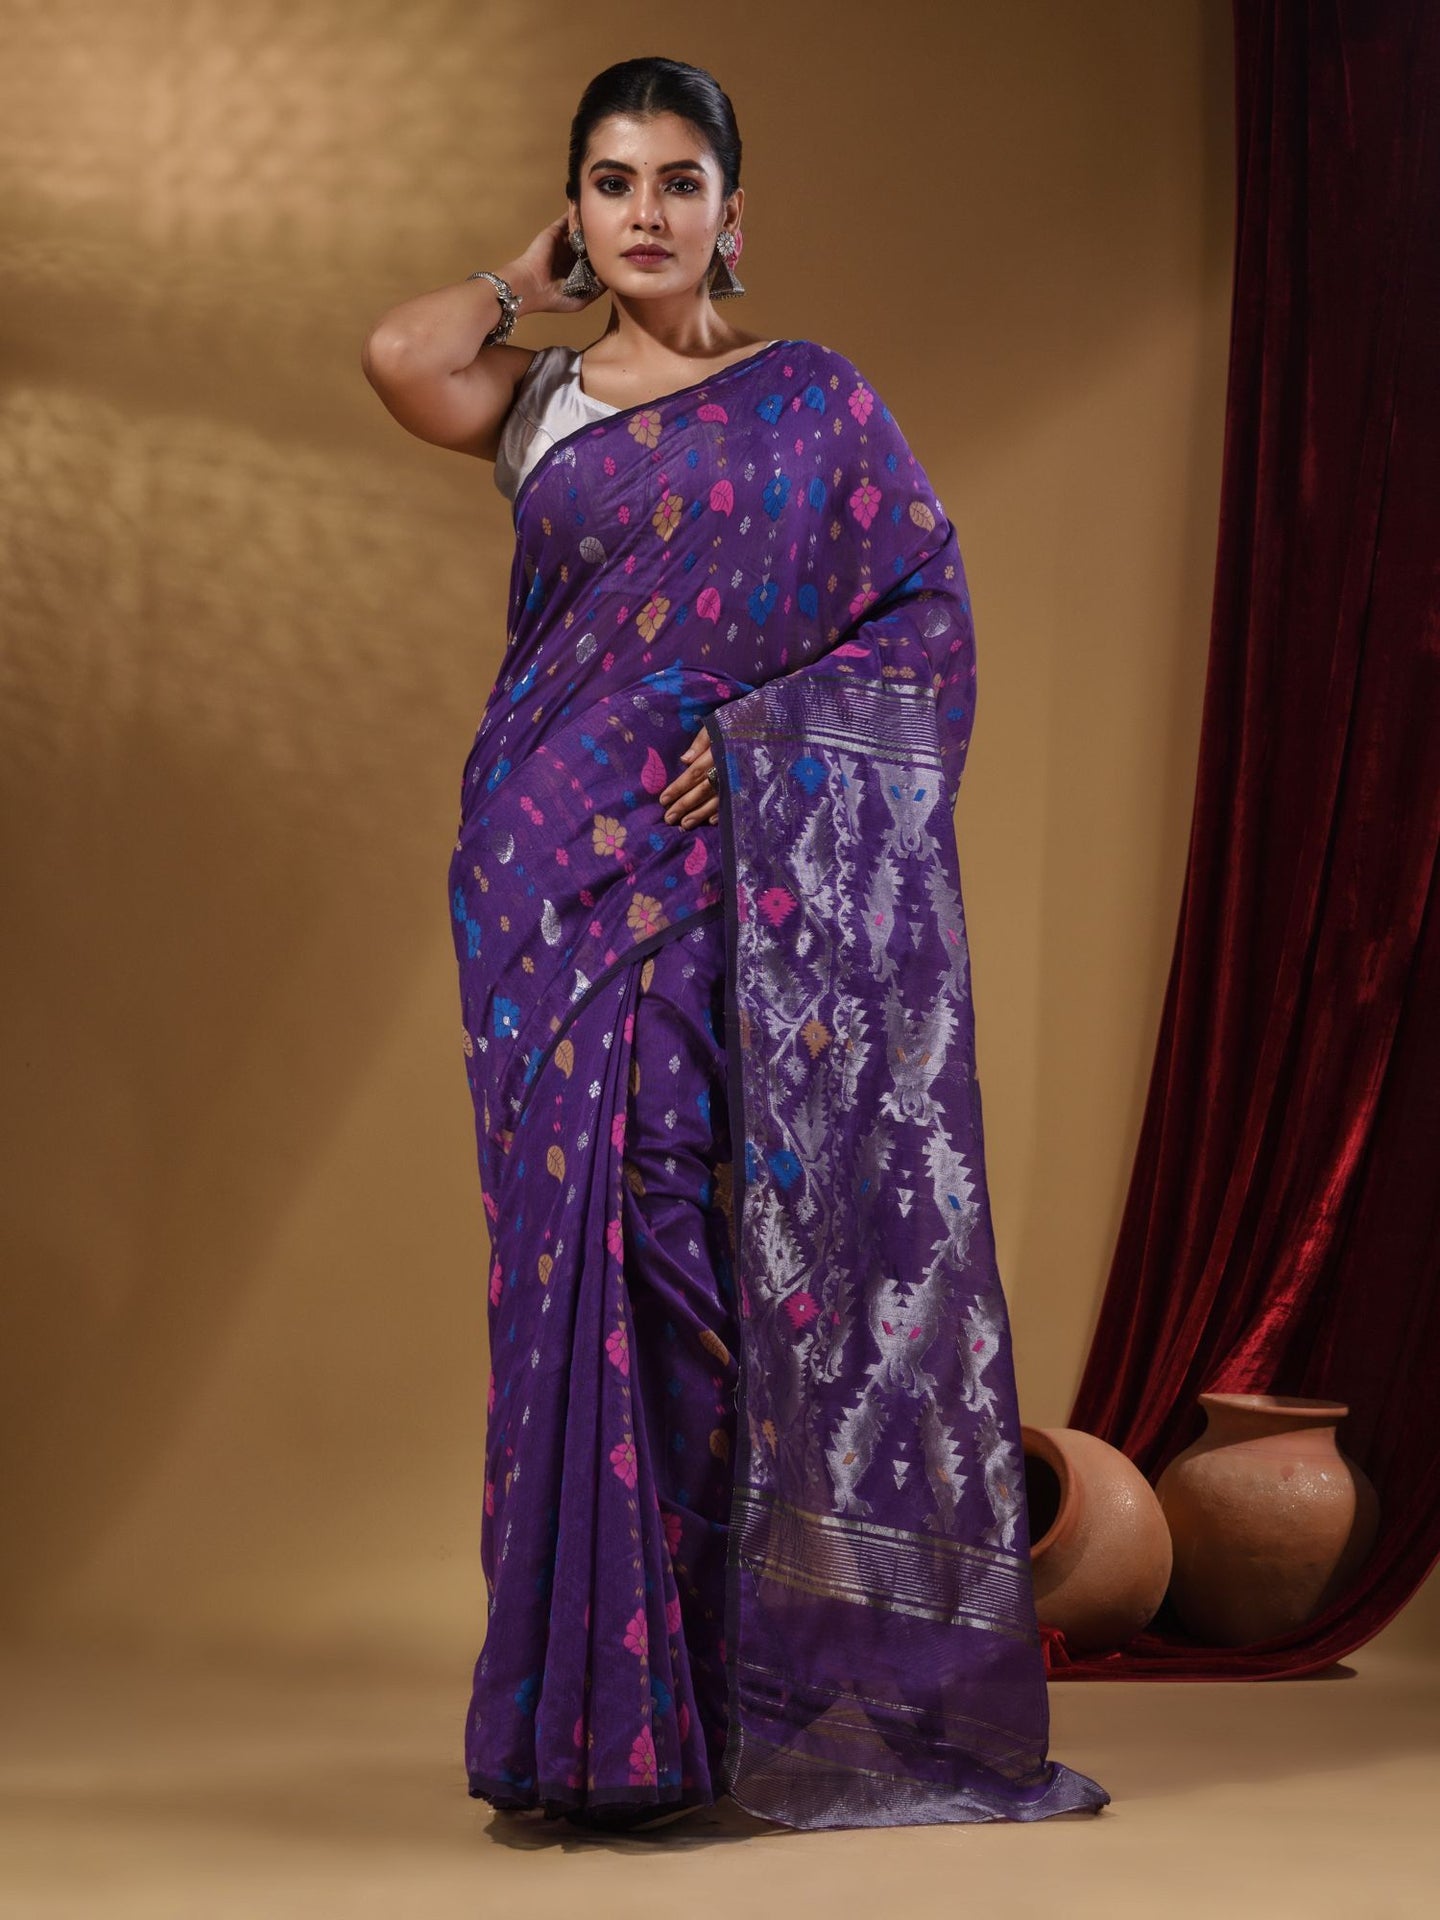 Violet Cotton Handwoven Jamdani Saree With Multicolor Woven Designs And Motifs